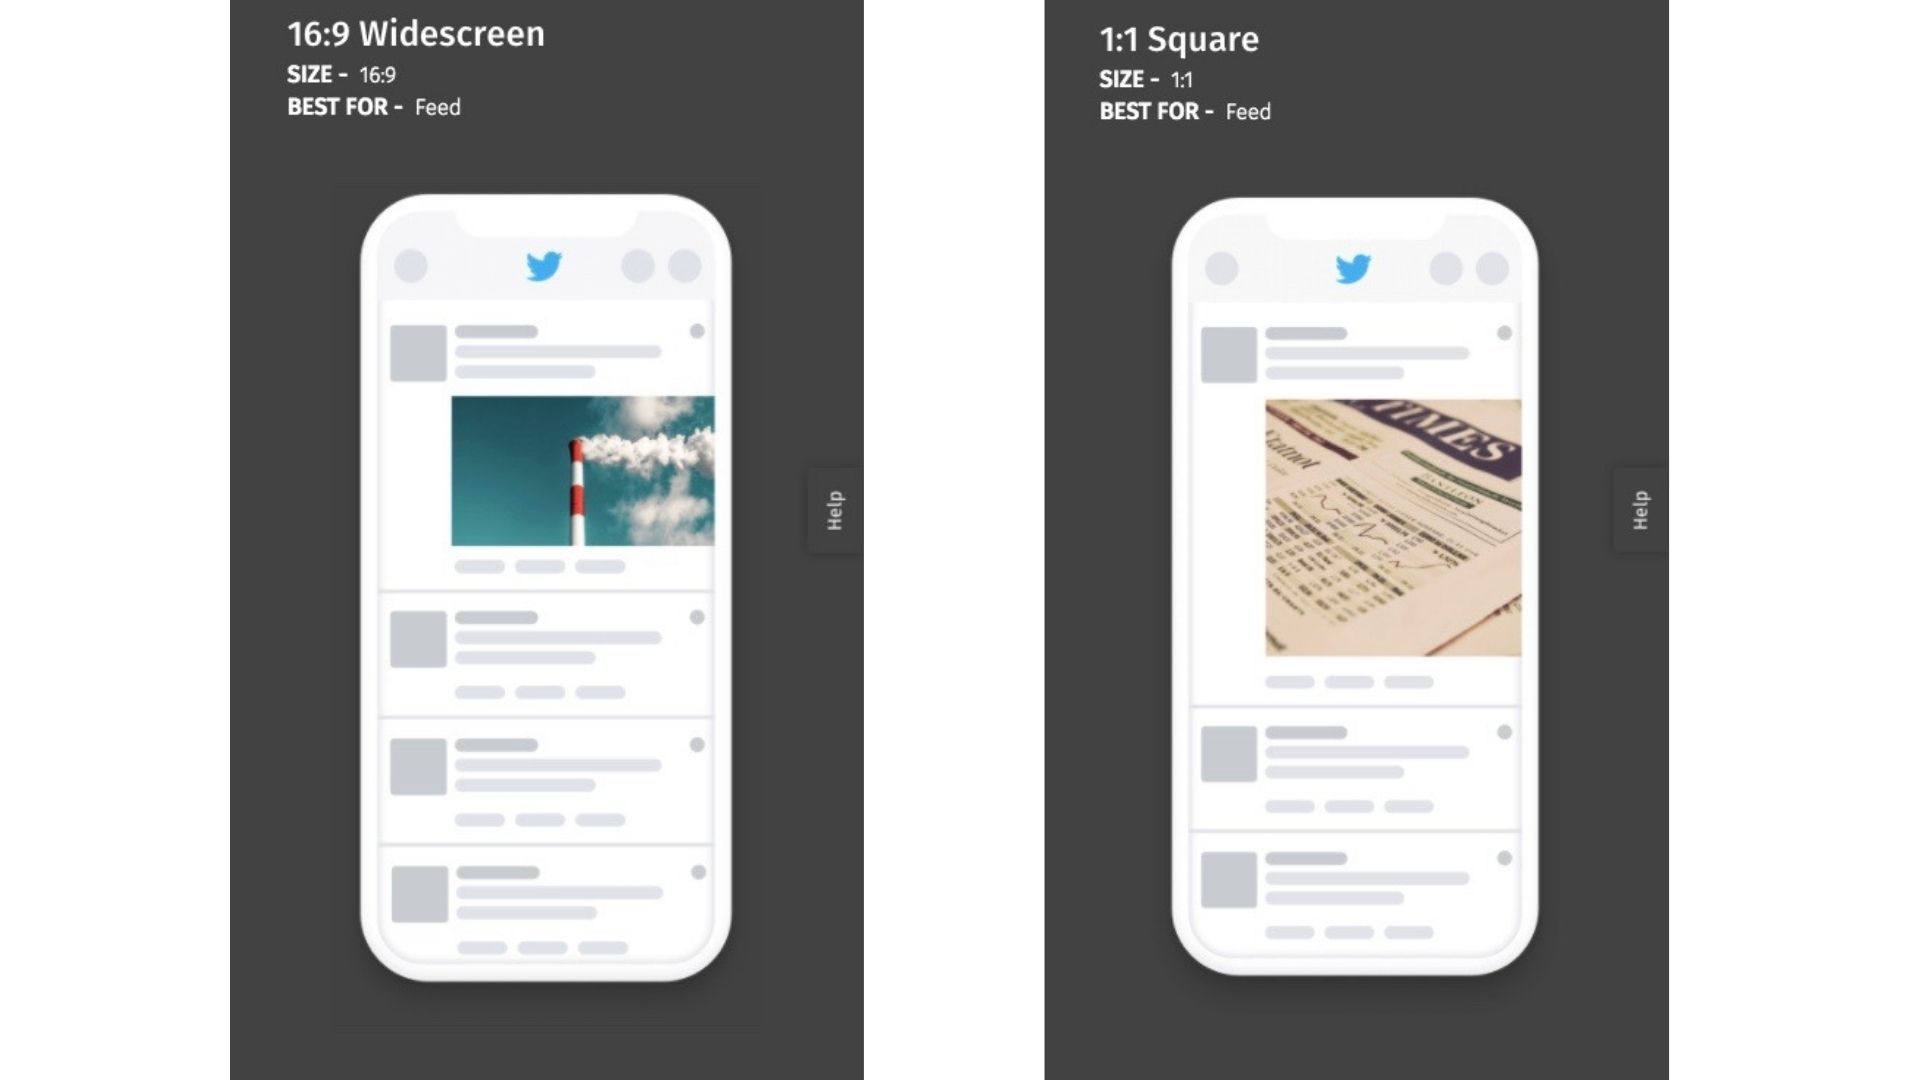 Twitter Video Requirements: Twitter Video Aspect Ratio